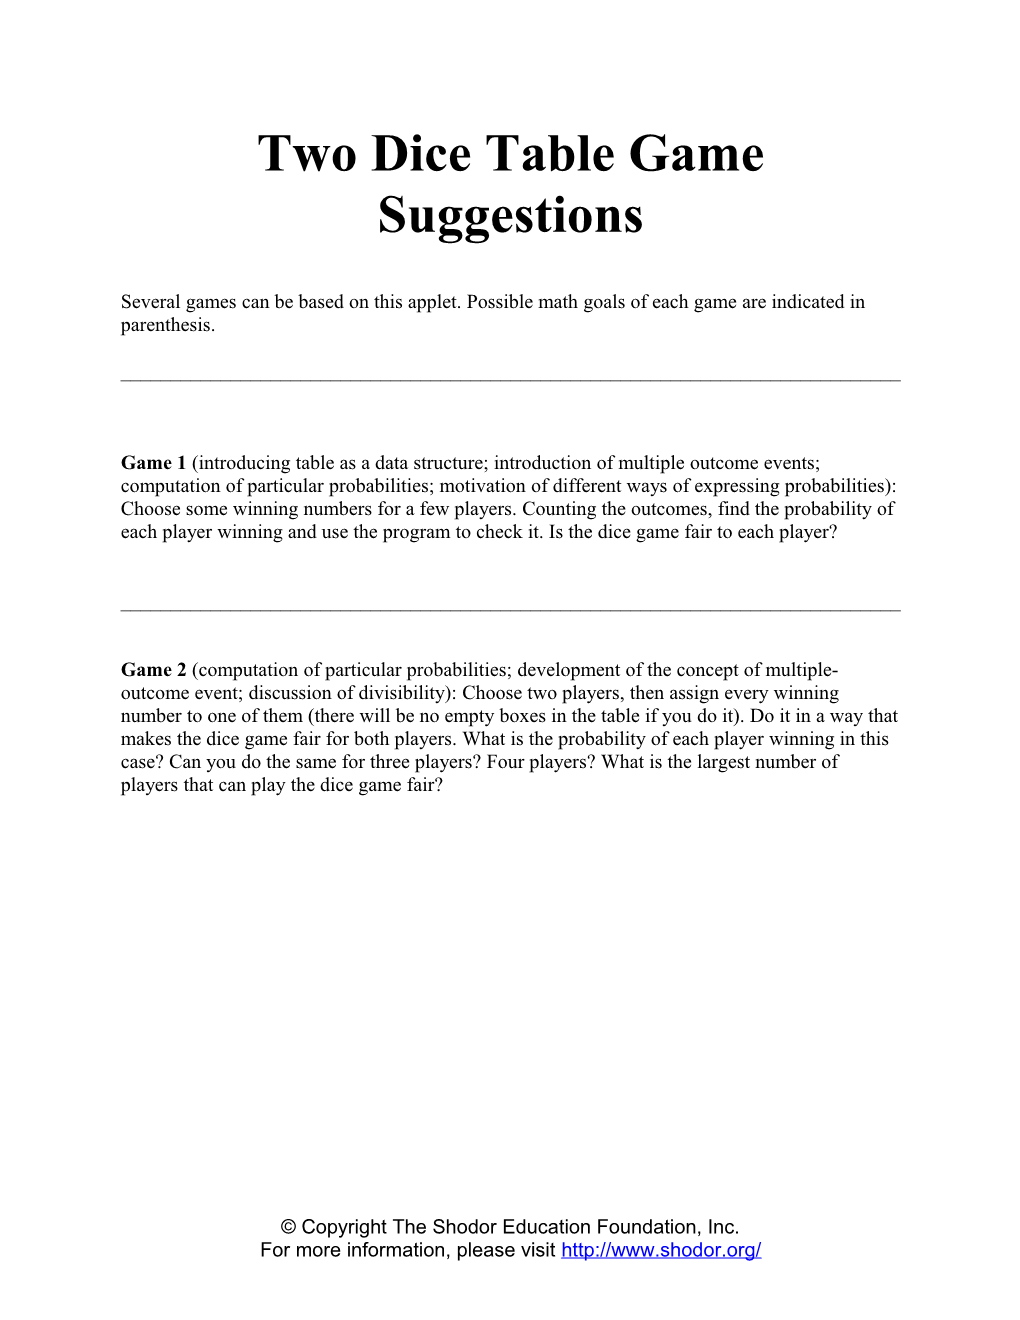 Two Dice Table Game Suggestions